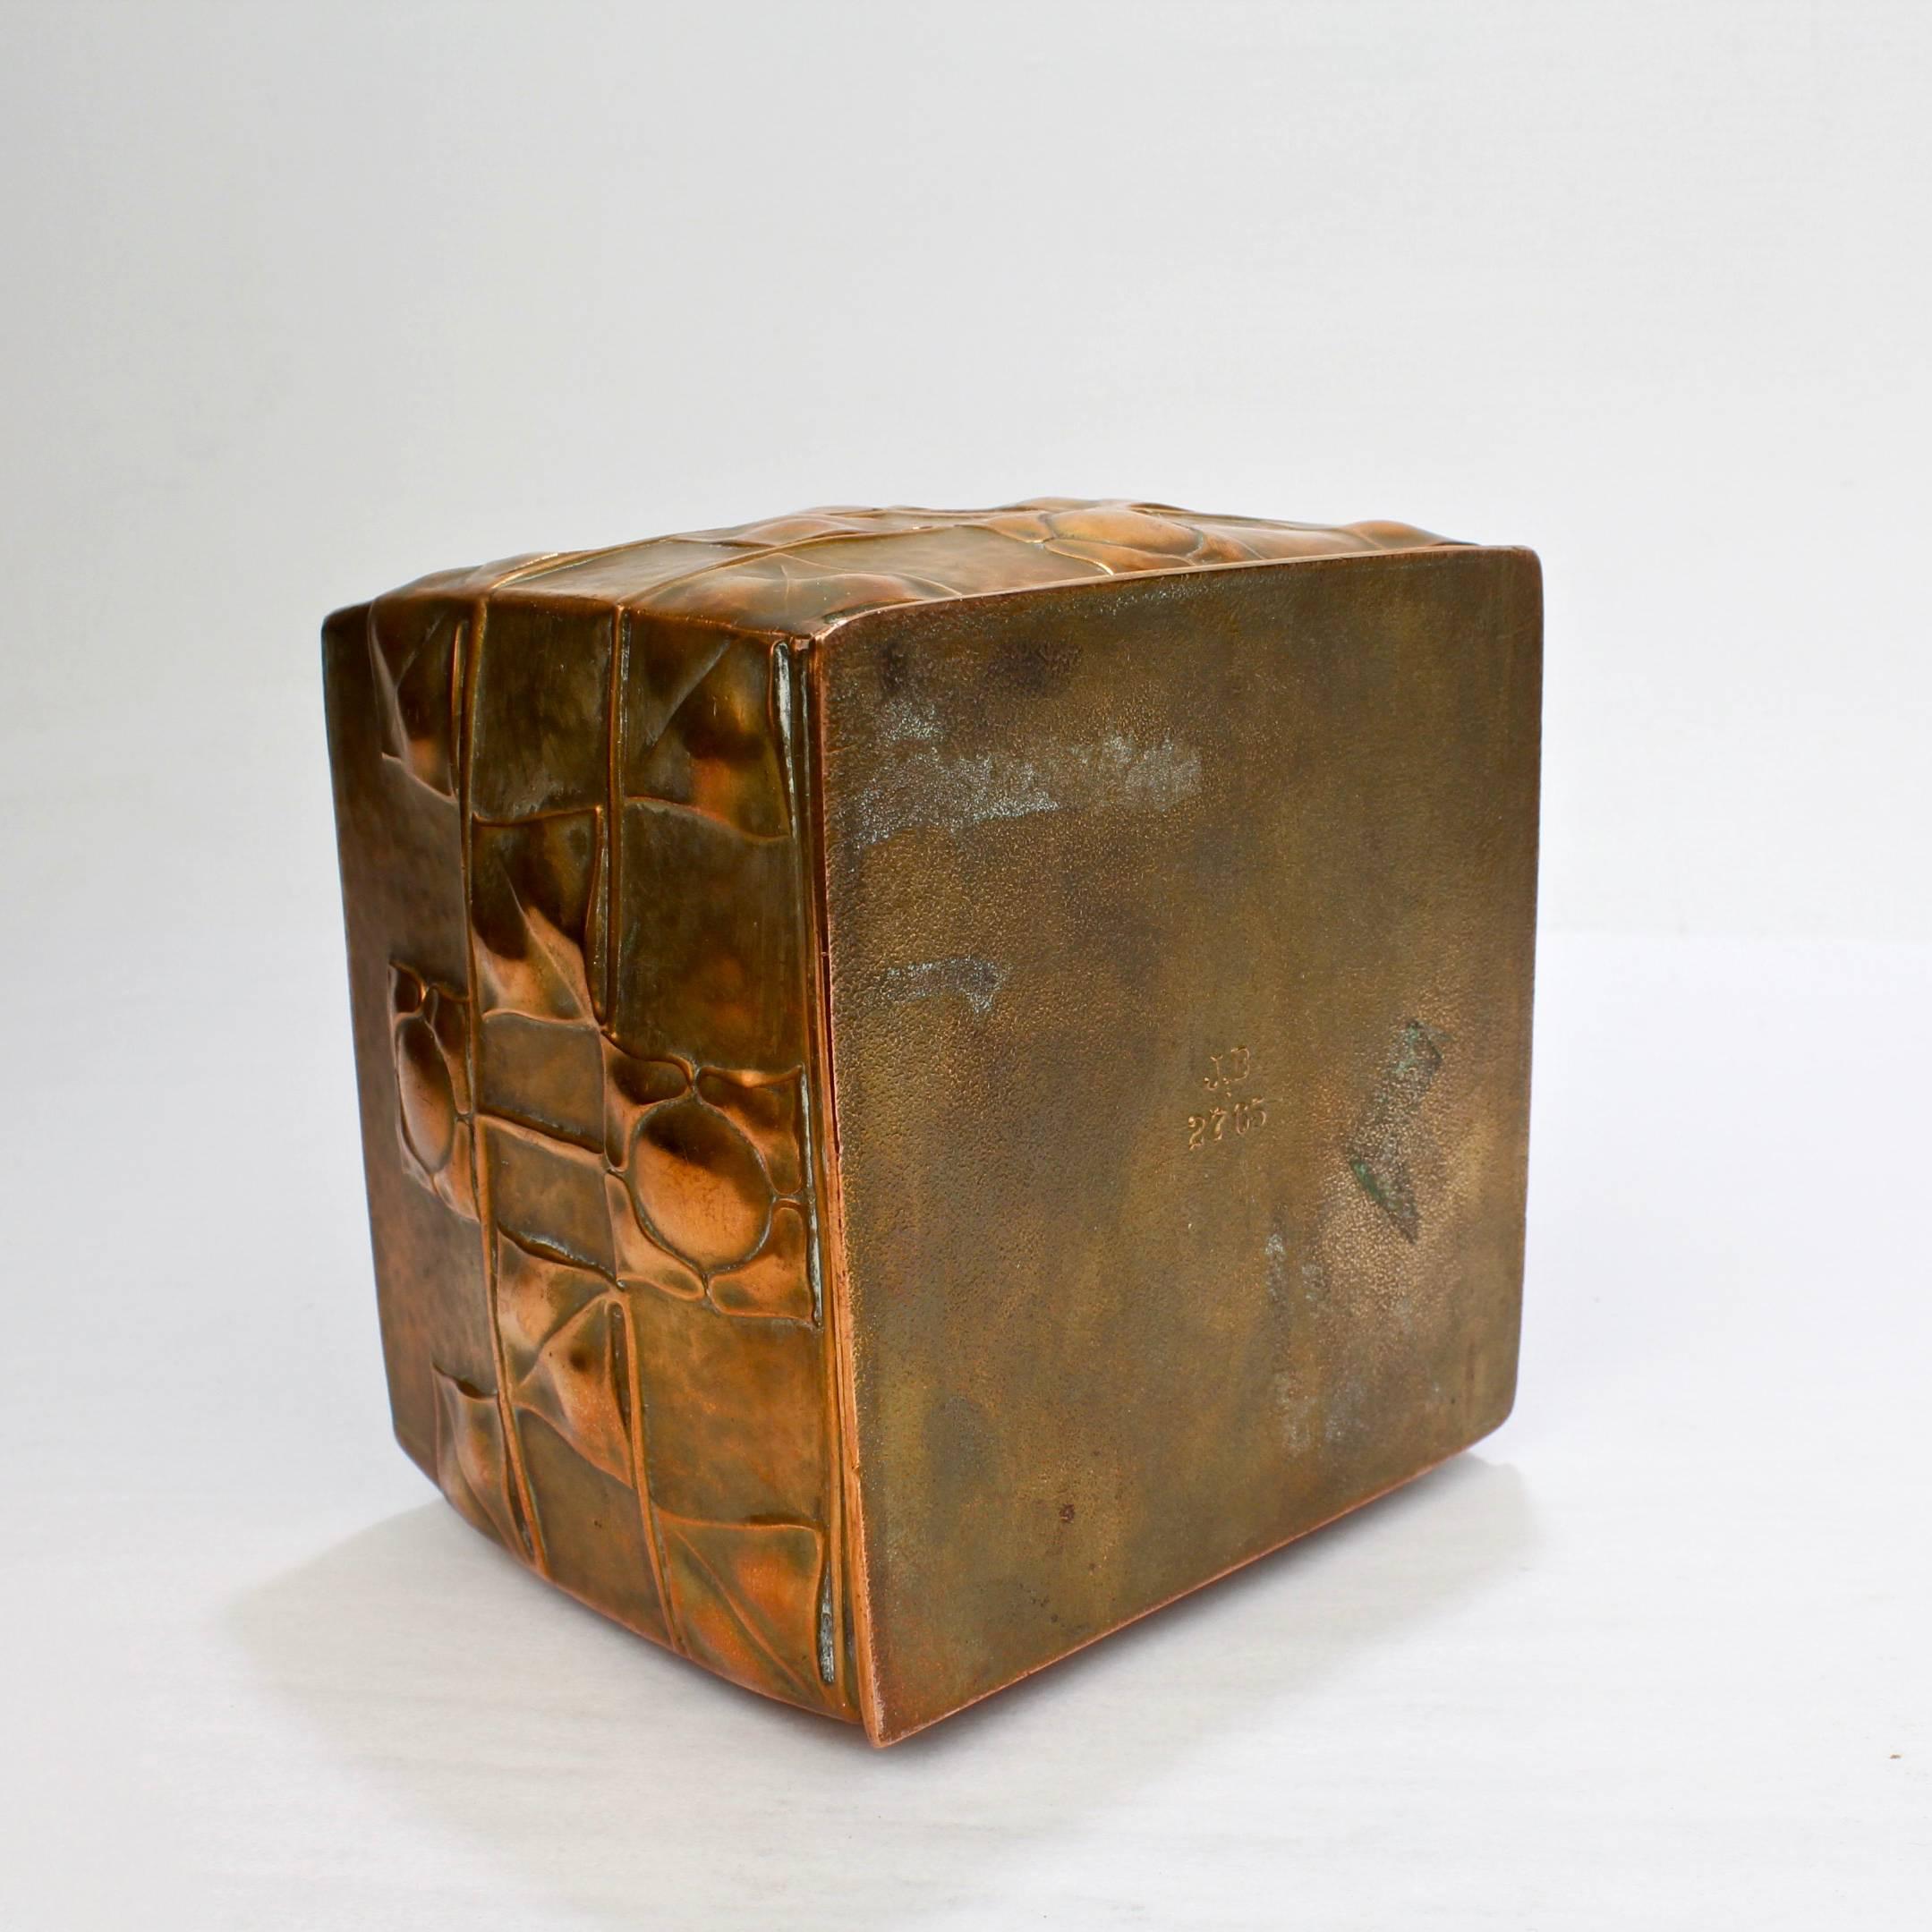 Art Nouveau Archibald Knox Design Copper Humidor by Jenning Brothers 3